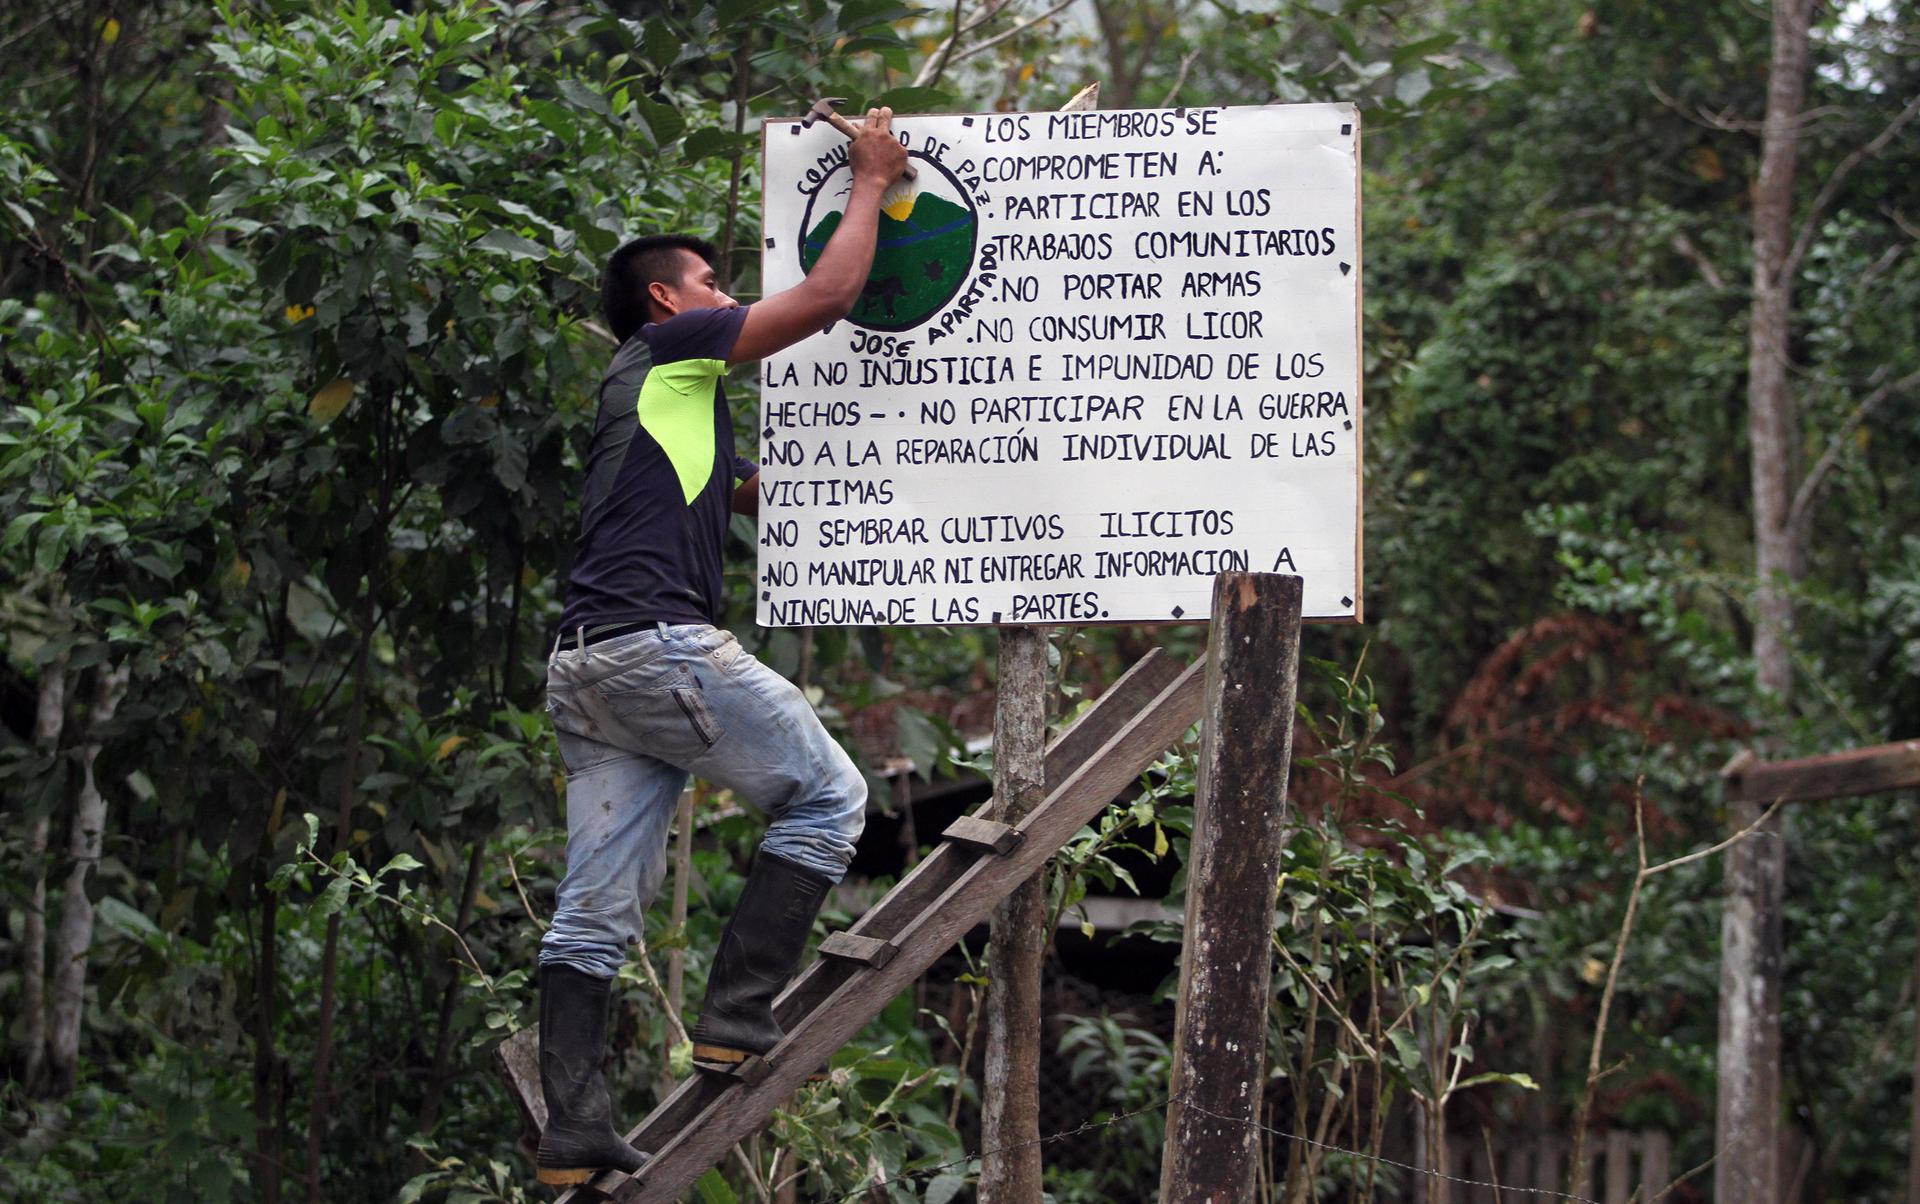 Germán, a community leader, hanging sign of community rules in preparation for 19th anniversary celebration